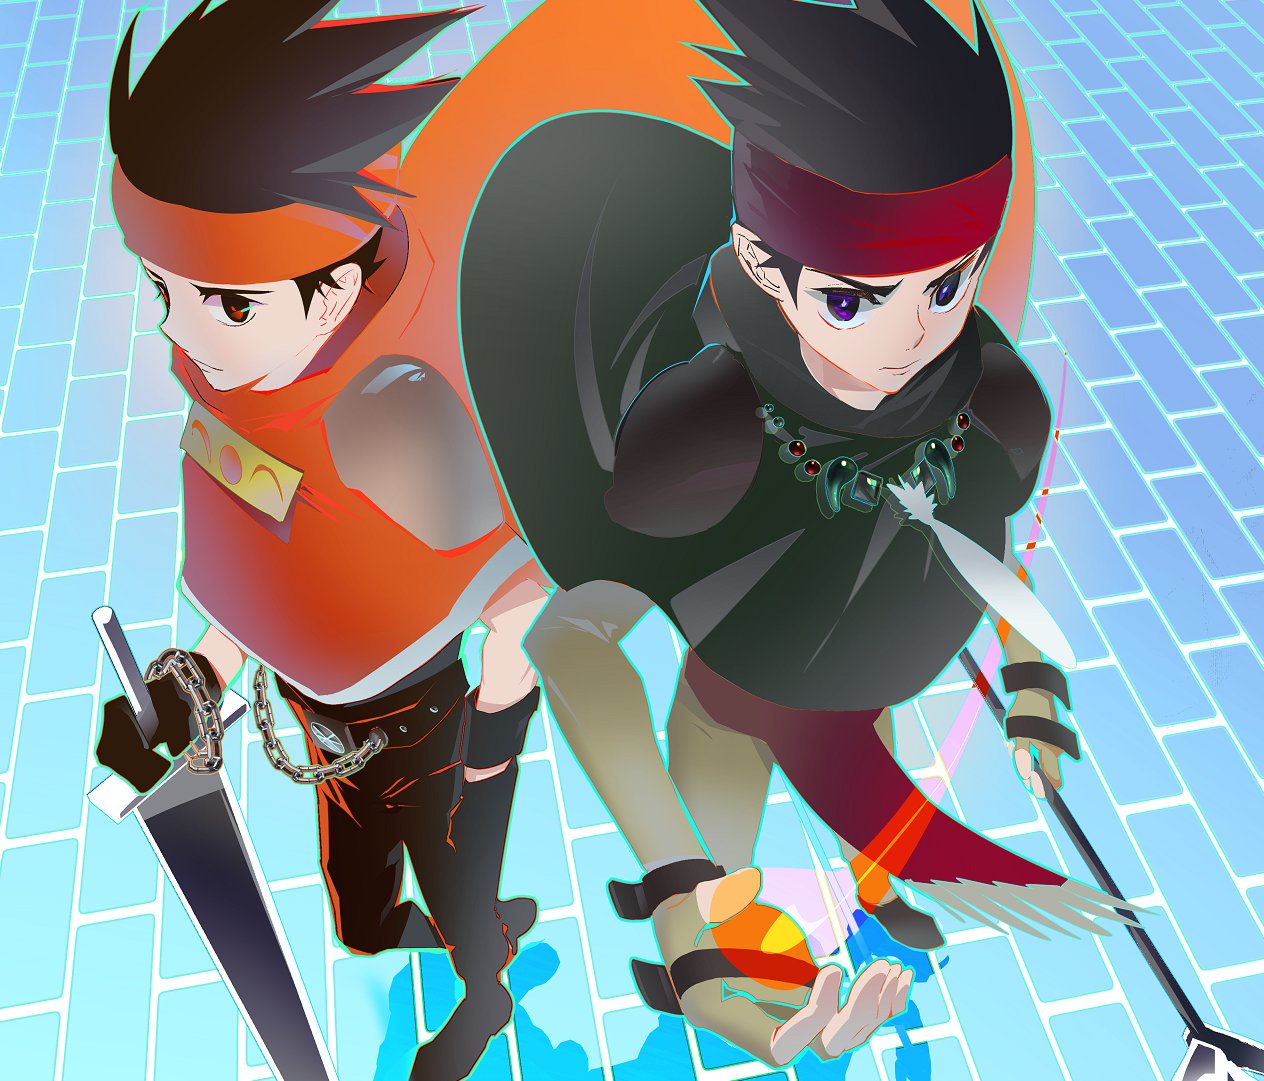 2boys arc_the_lad arc_the_lad_ii bandana belt boots brown_eyes brown_hair cape chain closed_mouth dual_persona elc_(arc_the_lad) fingerless_gloves fire gloves looking_at_viewer magic multiple_boys polearm protected_link save_scene_a short_hair spear sword violet_eyes weapon